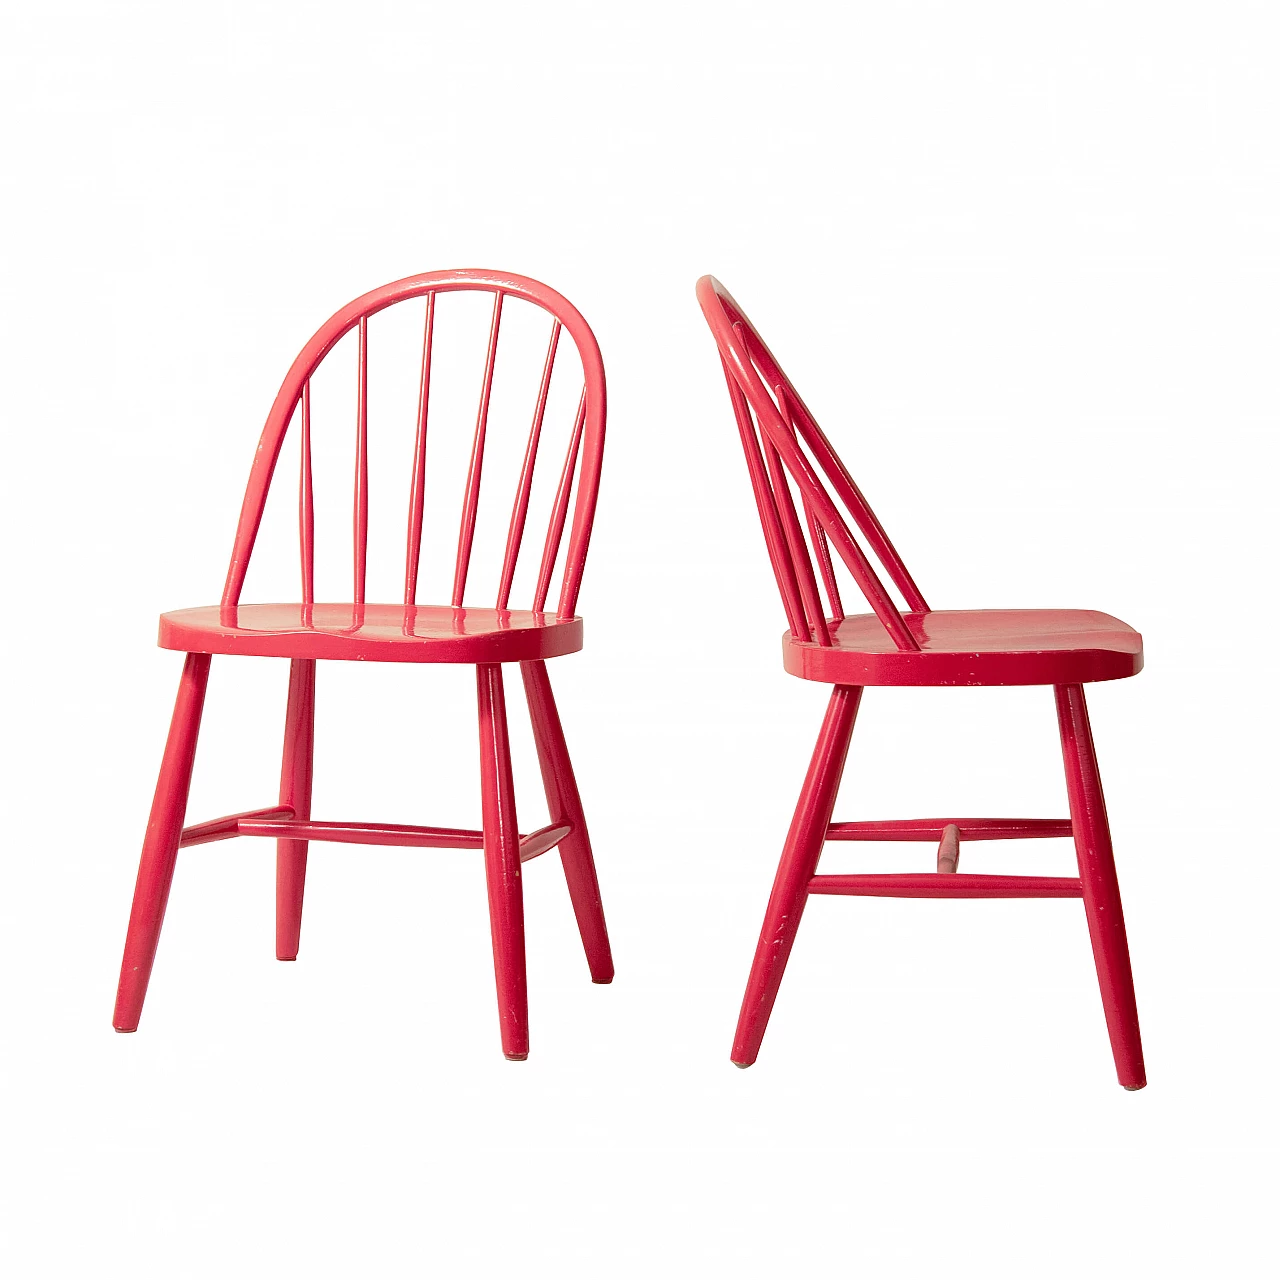 Pair of red Windsor model chairs 1145194